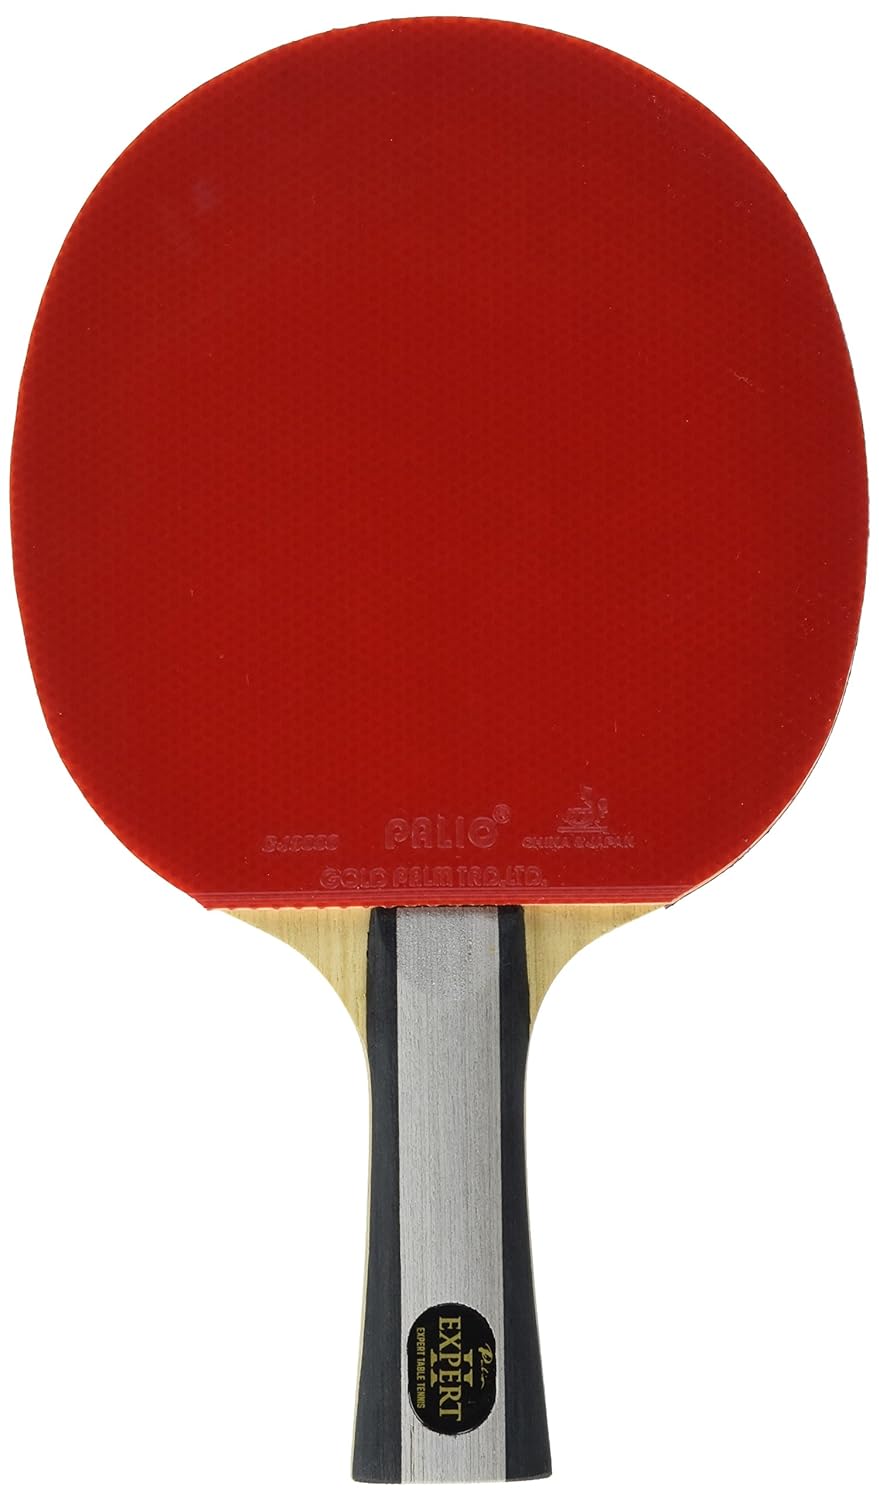 table tennis racket buying guide